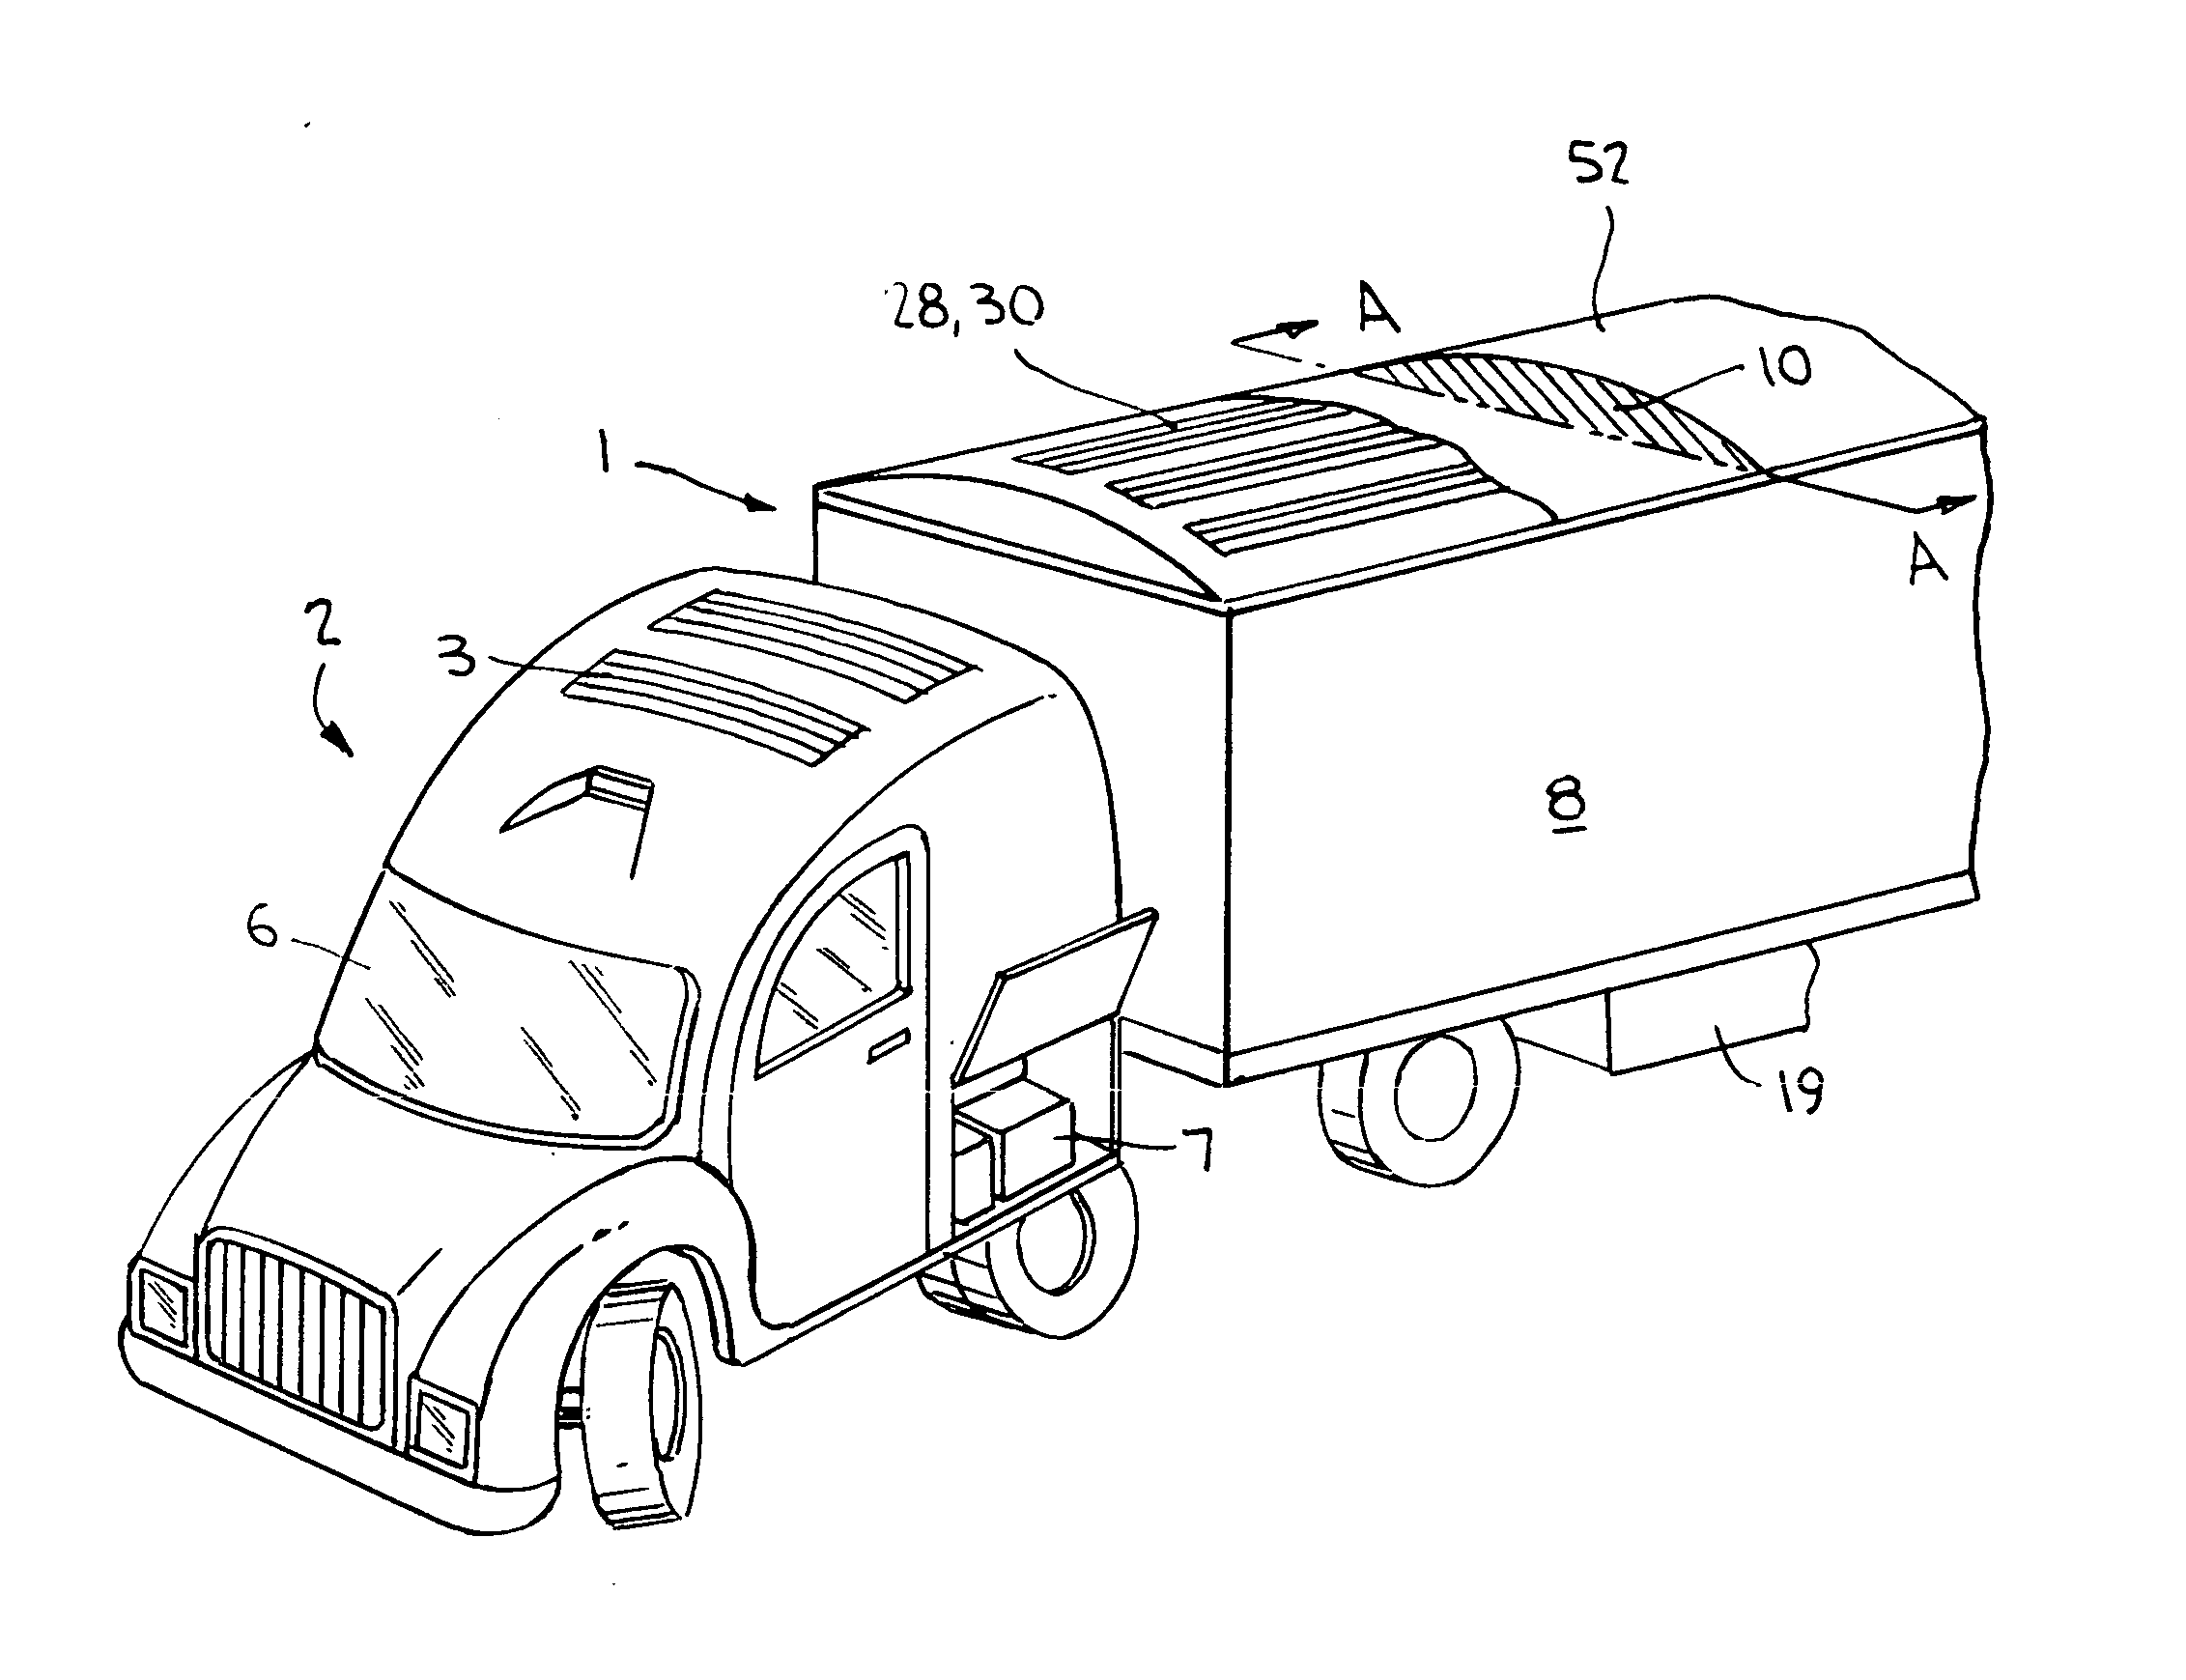 Solar auxiliary power systems for vehicles